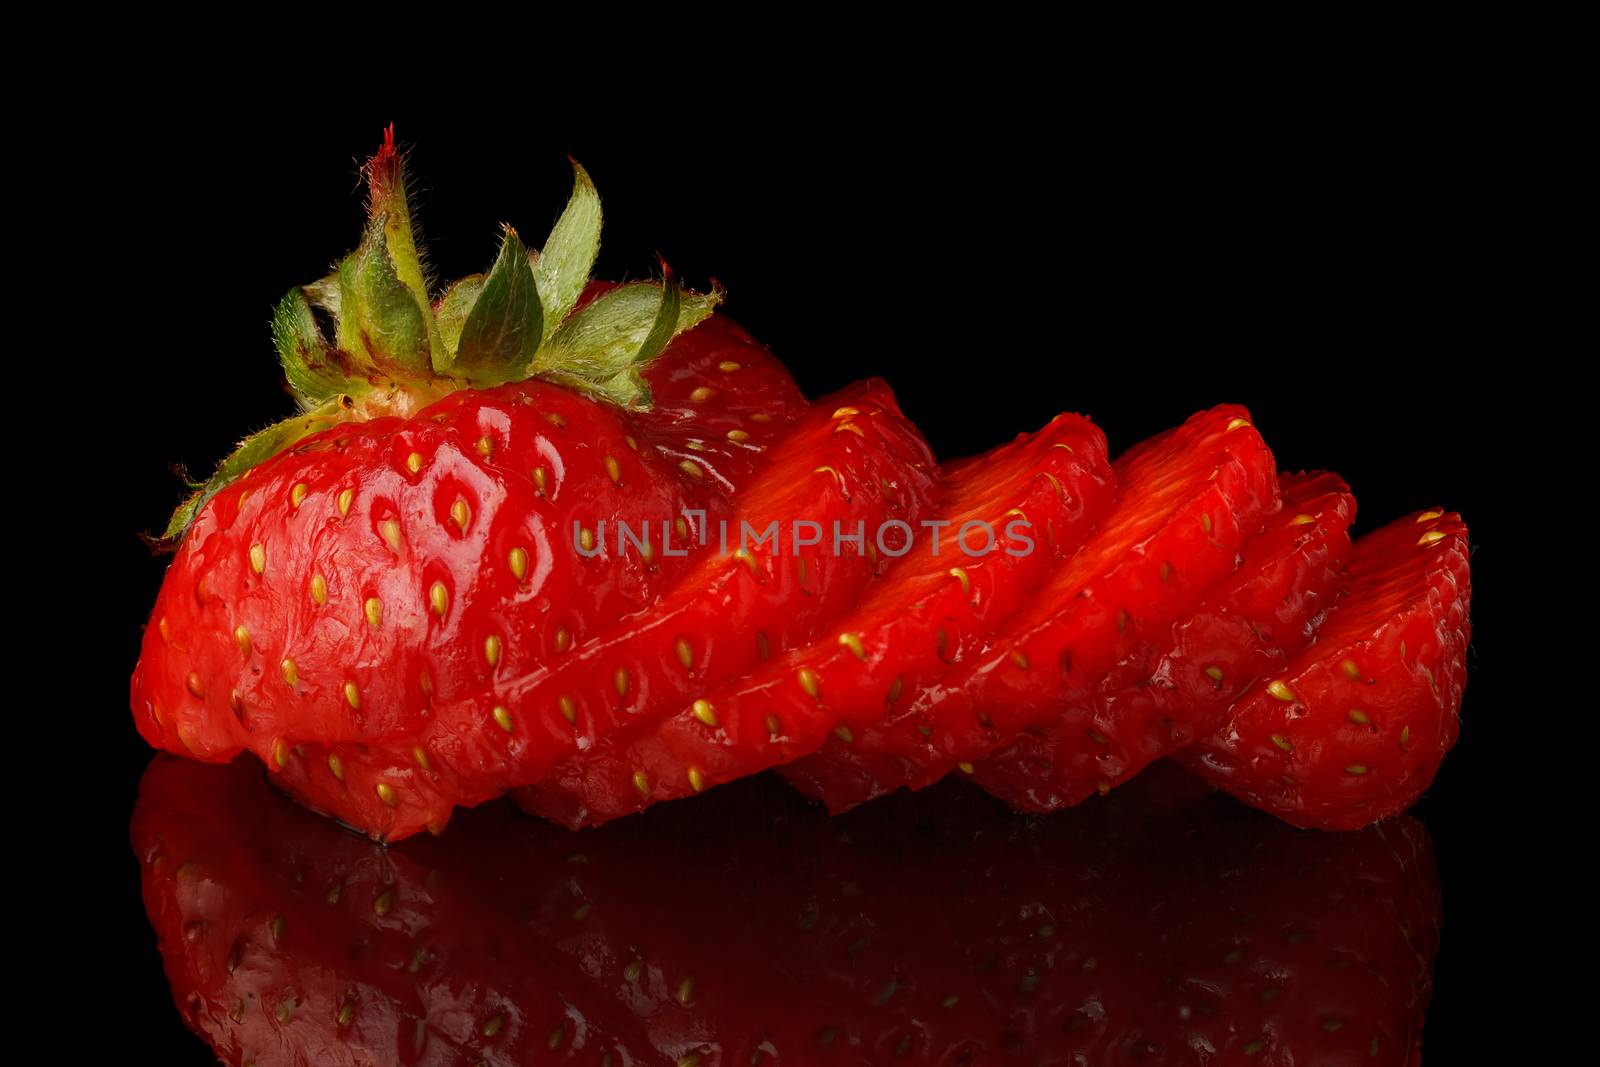 Natural fresh strawberries on a black background.
